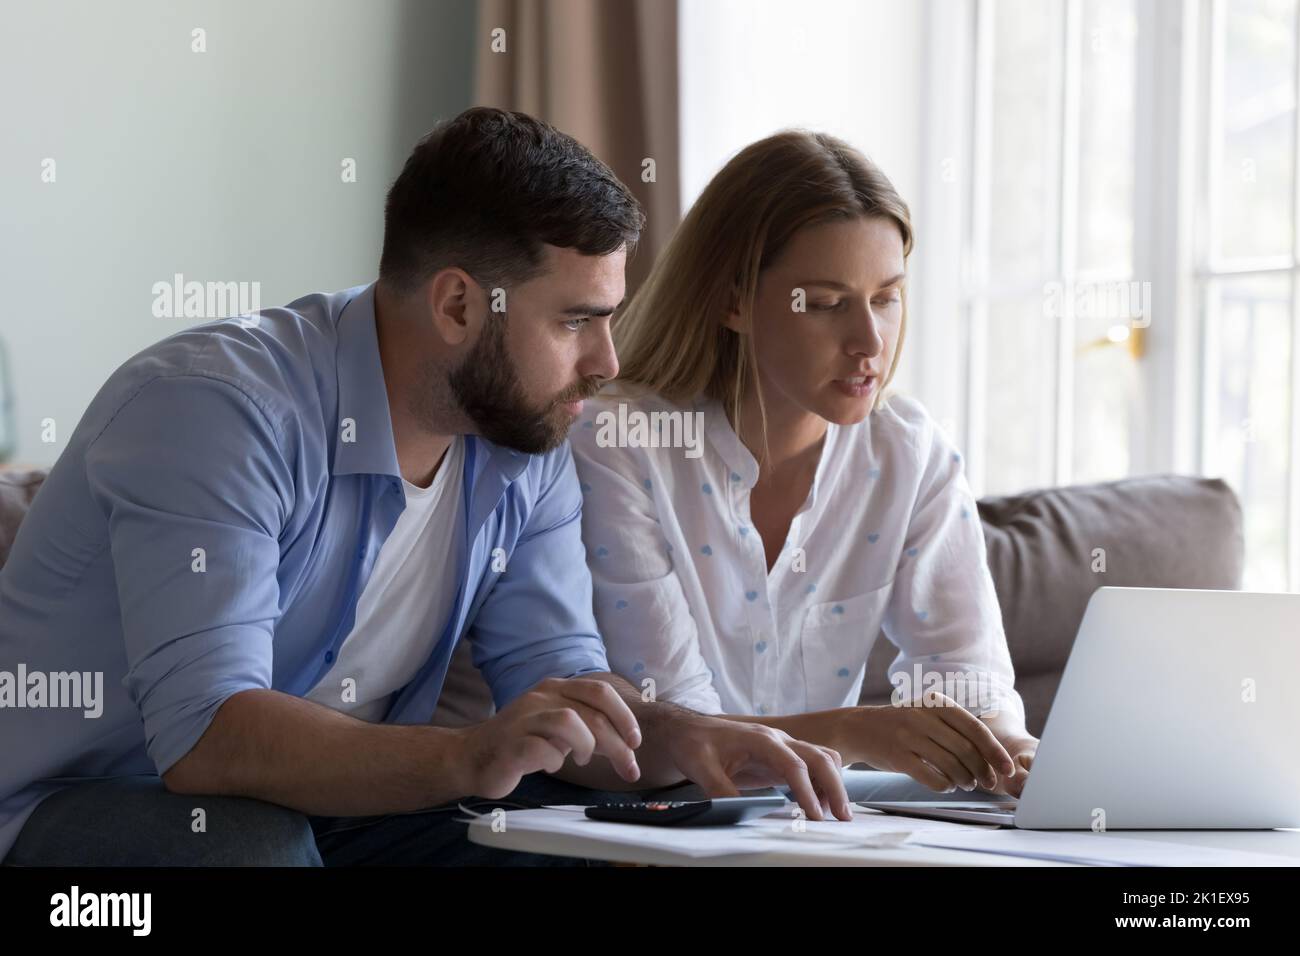 Serious focused wife showing online domestic payment app to husband Stock Photo